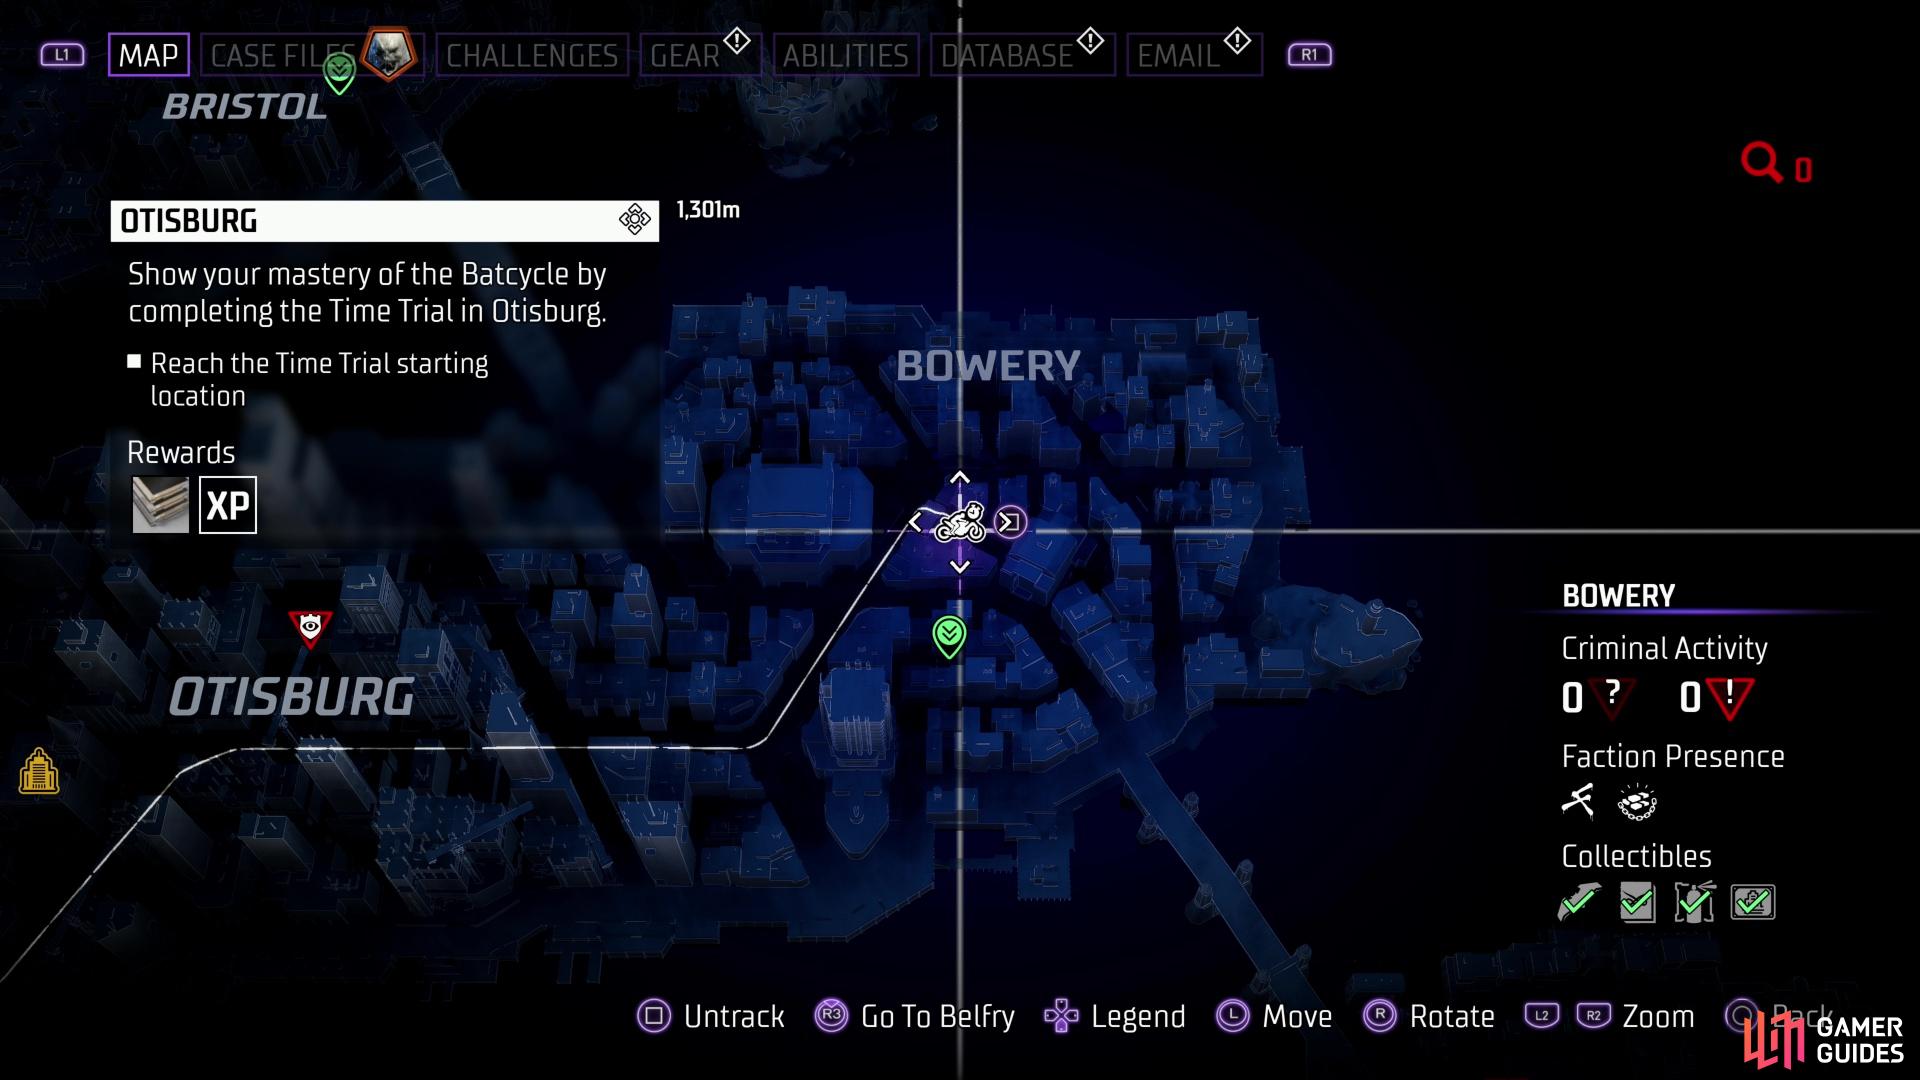 After starting Case 04, you'll be able to find one Batcycle Time Trial activity on the map.